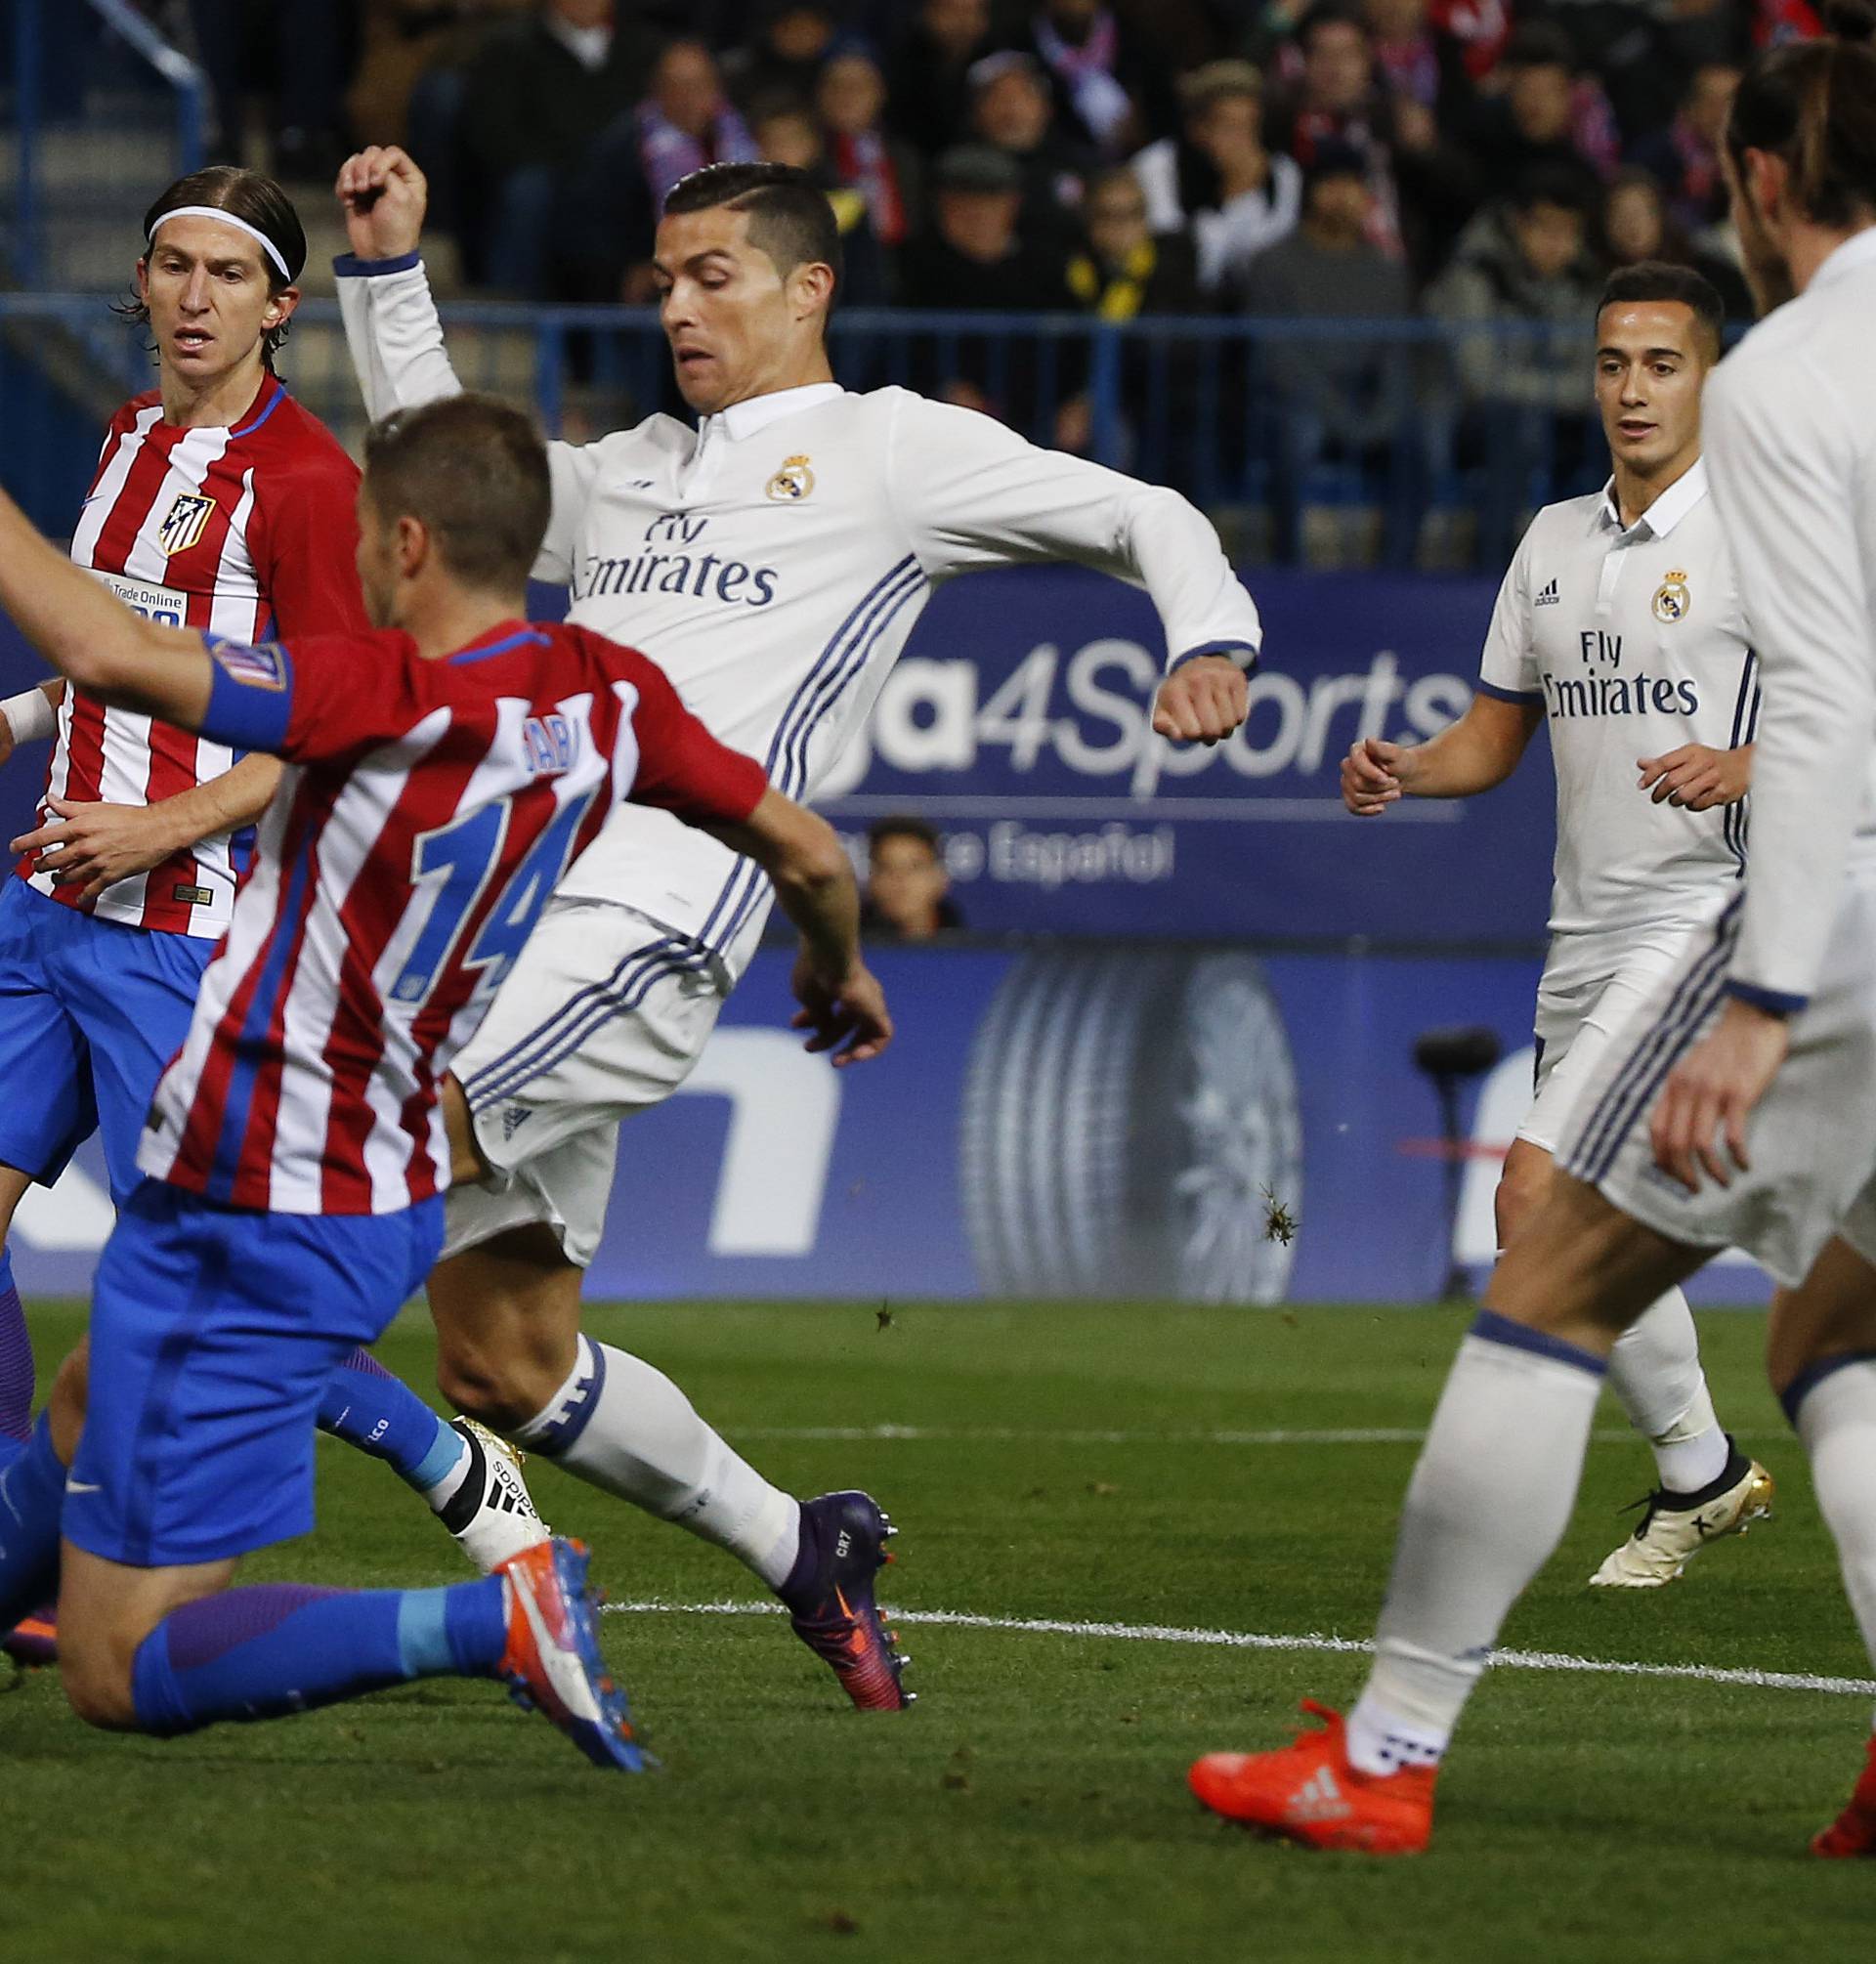 Real Madrid's Cristiano Ronaldo in action with Atletico Madrid's Gabi